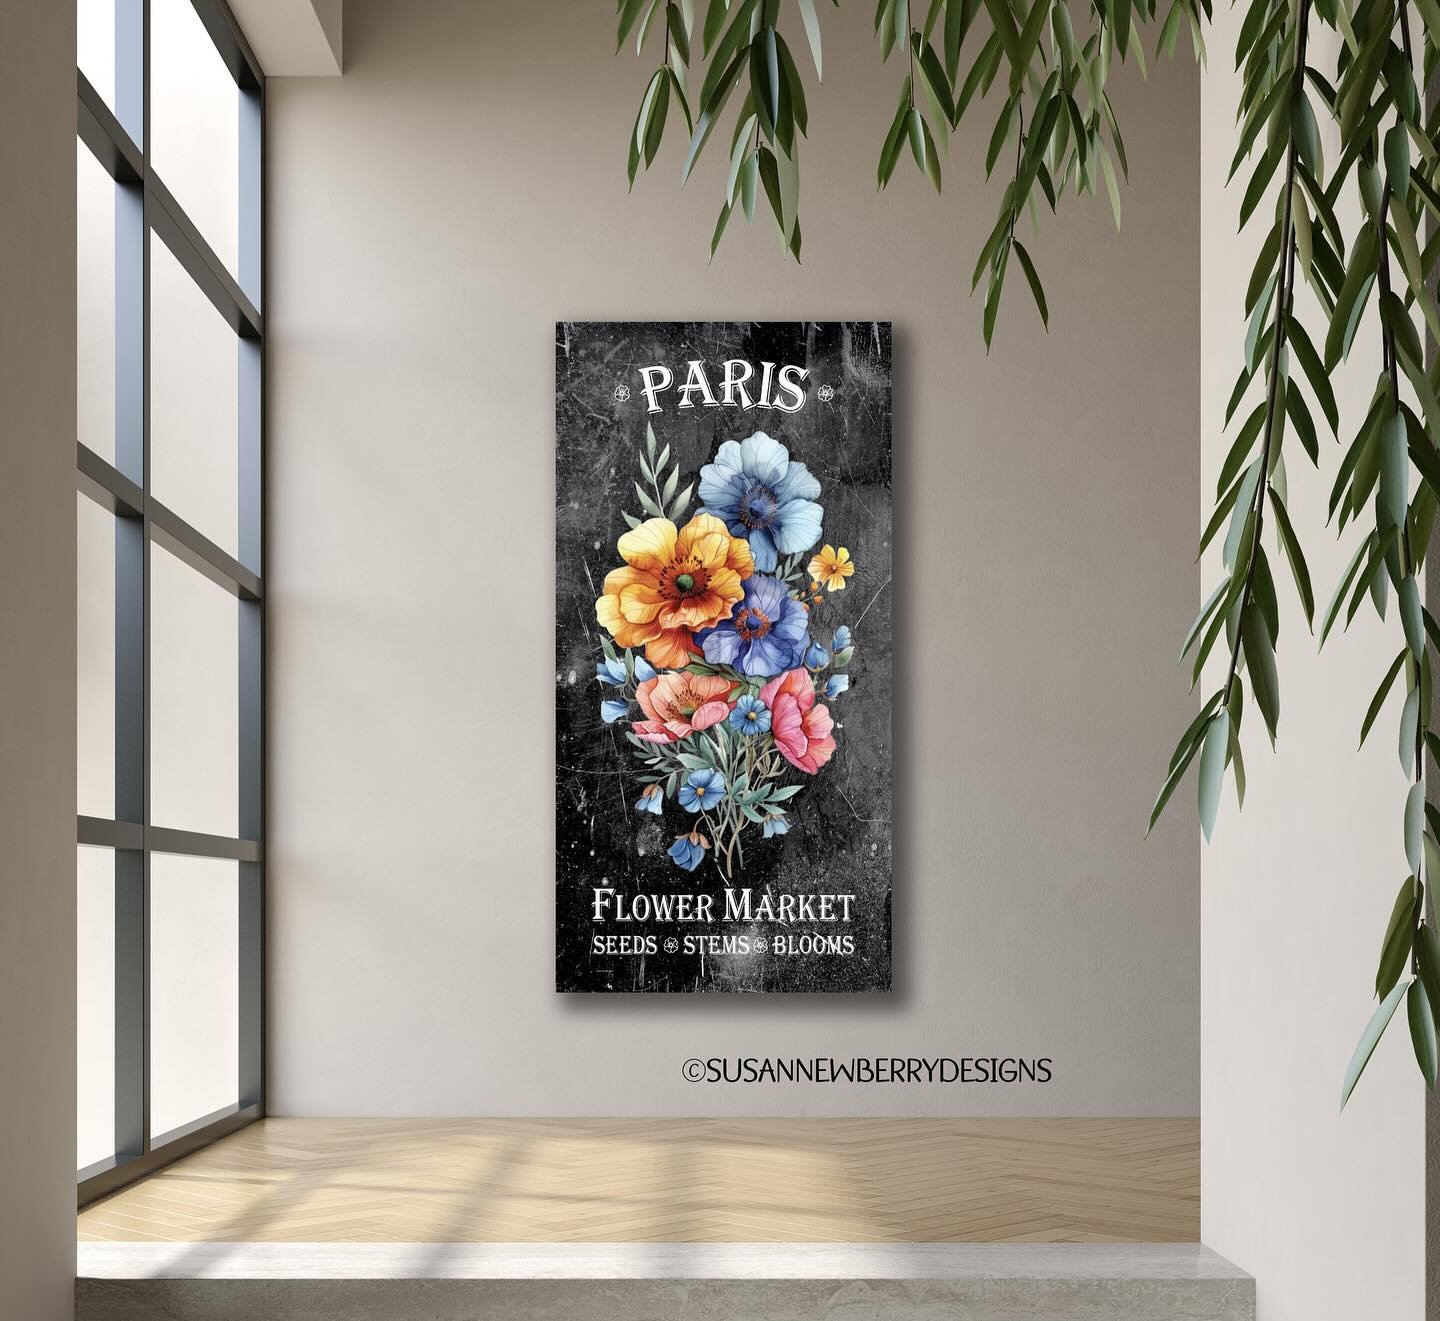 &ldquo;🌸 Introducing Elegance in Metal 🌸
Our latest creation brings the charm of the Paris Flower Market right into your home! The Paris Flower Market Metal Sign II is more than just a print; it&rsquo;s a statement of modern farmhouse style. Design